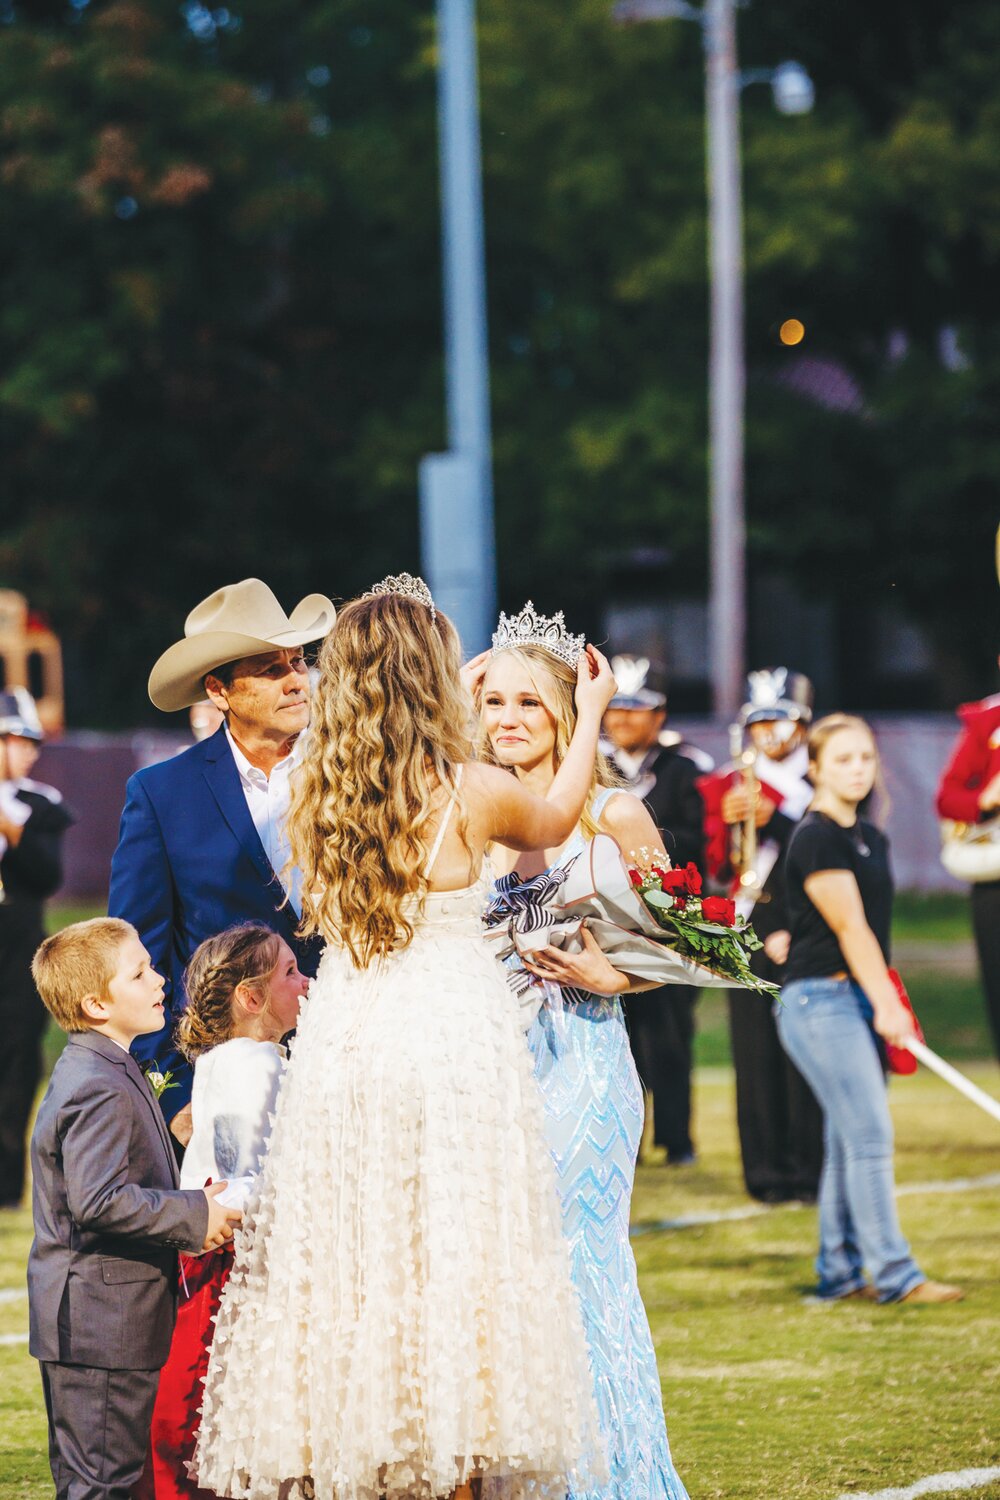 Returning 2022 Homecoming Queen, Savannah Villines, crowned Faith, with junior escorts Clayton Comer and Mallorie Thomas looking on.